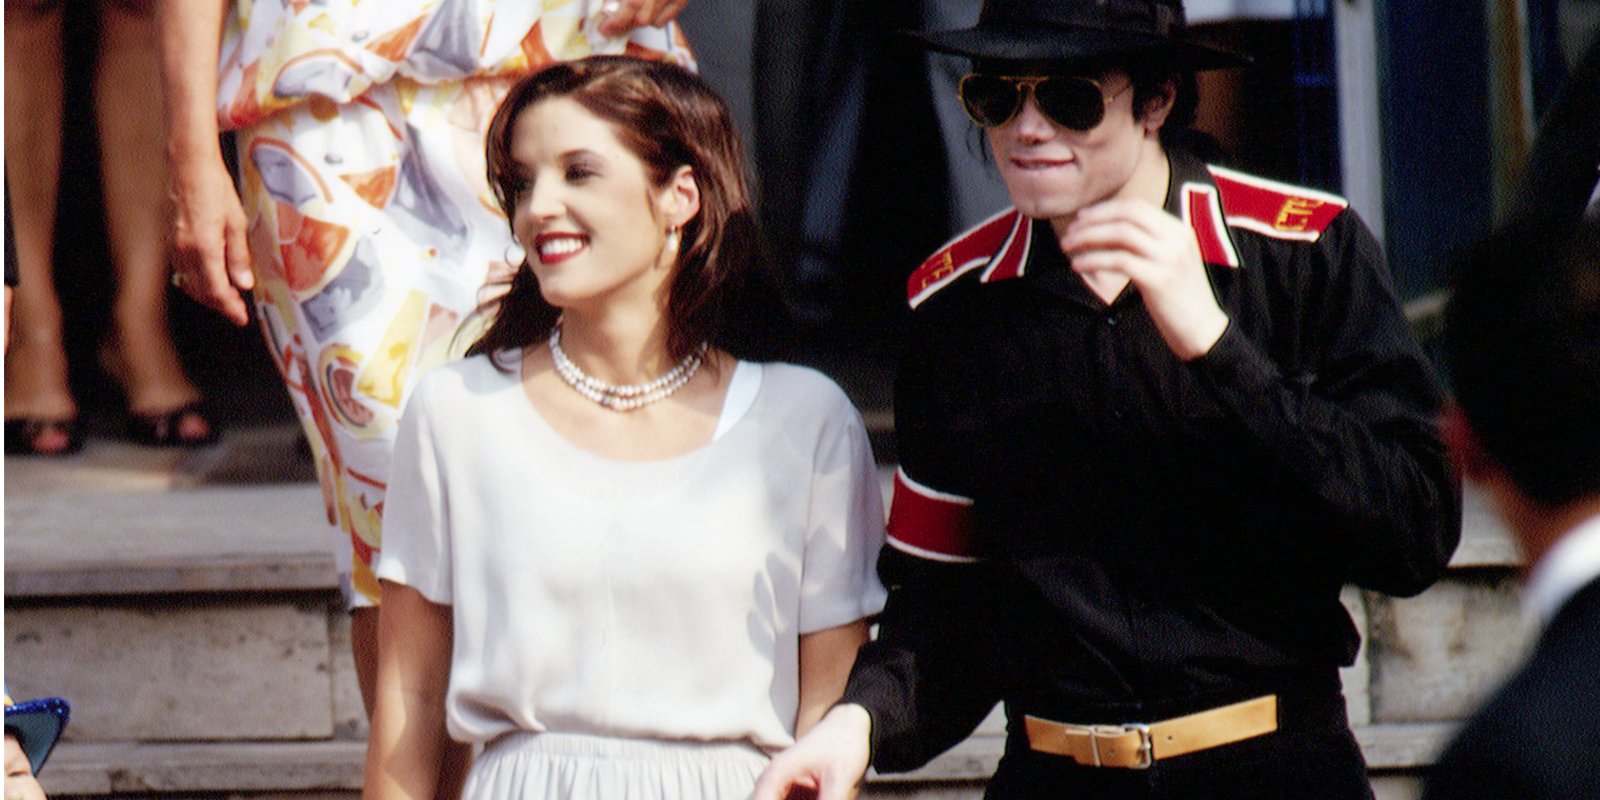 Lisa Marie Presley and Michael Jackson photographed together in front of a press pool.